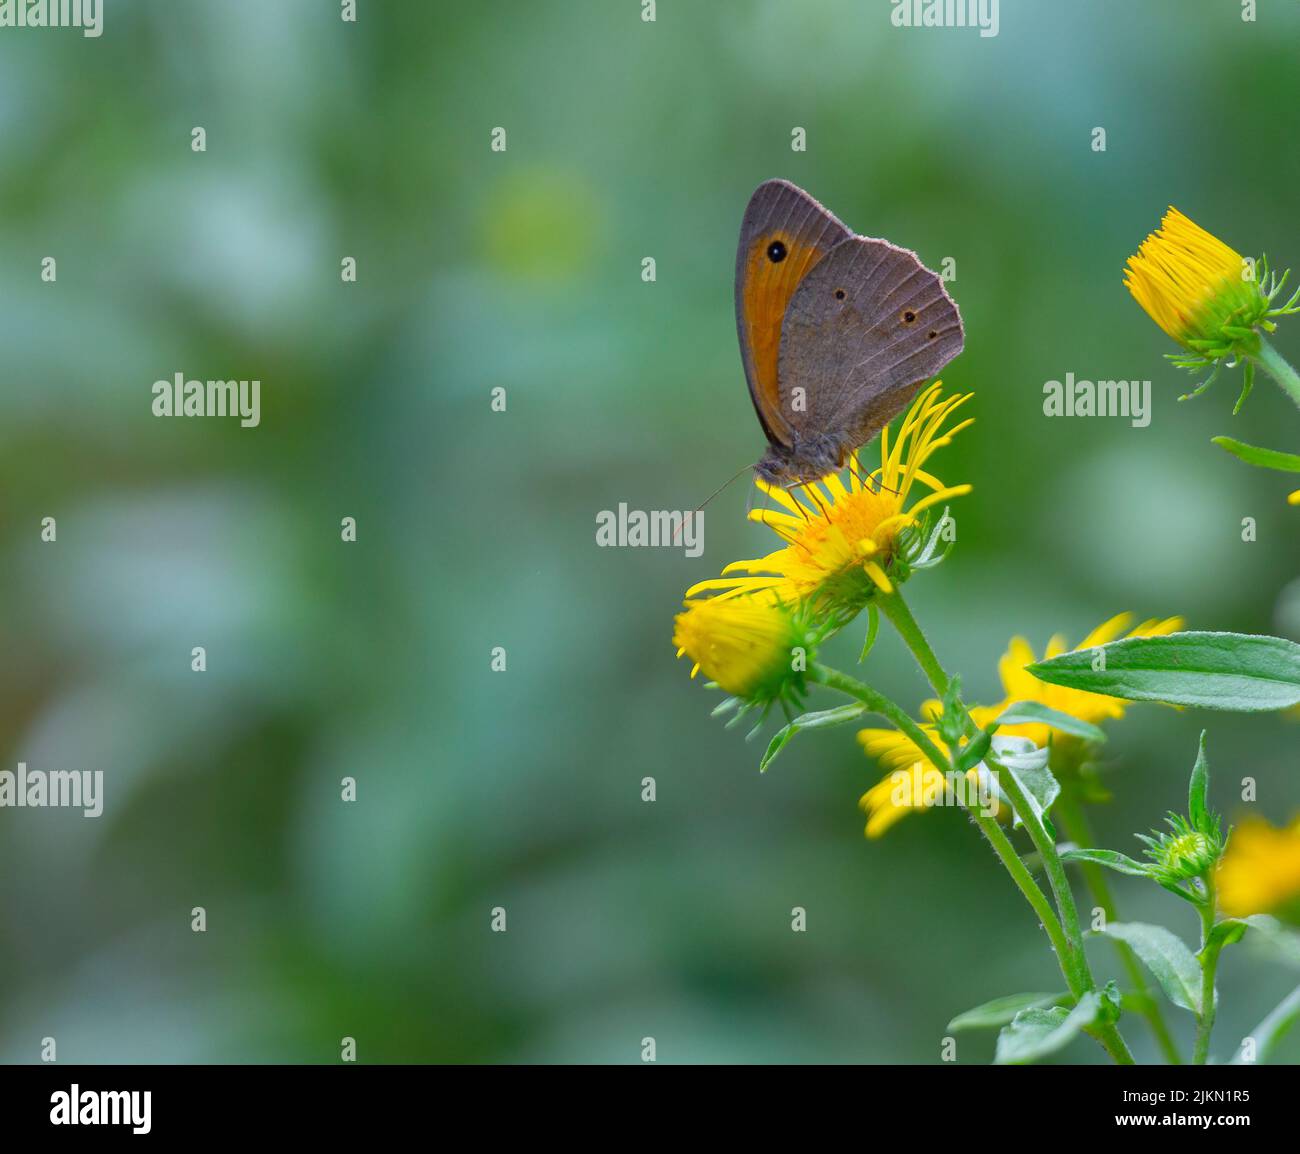 A closeup of a Lepidoptera on a flower with yellow petals against the blurred background Stock Photo